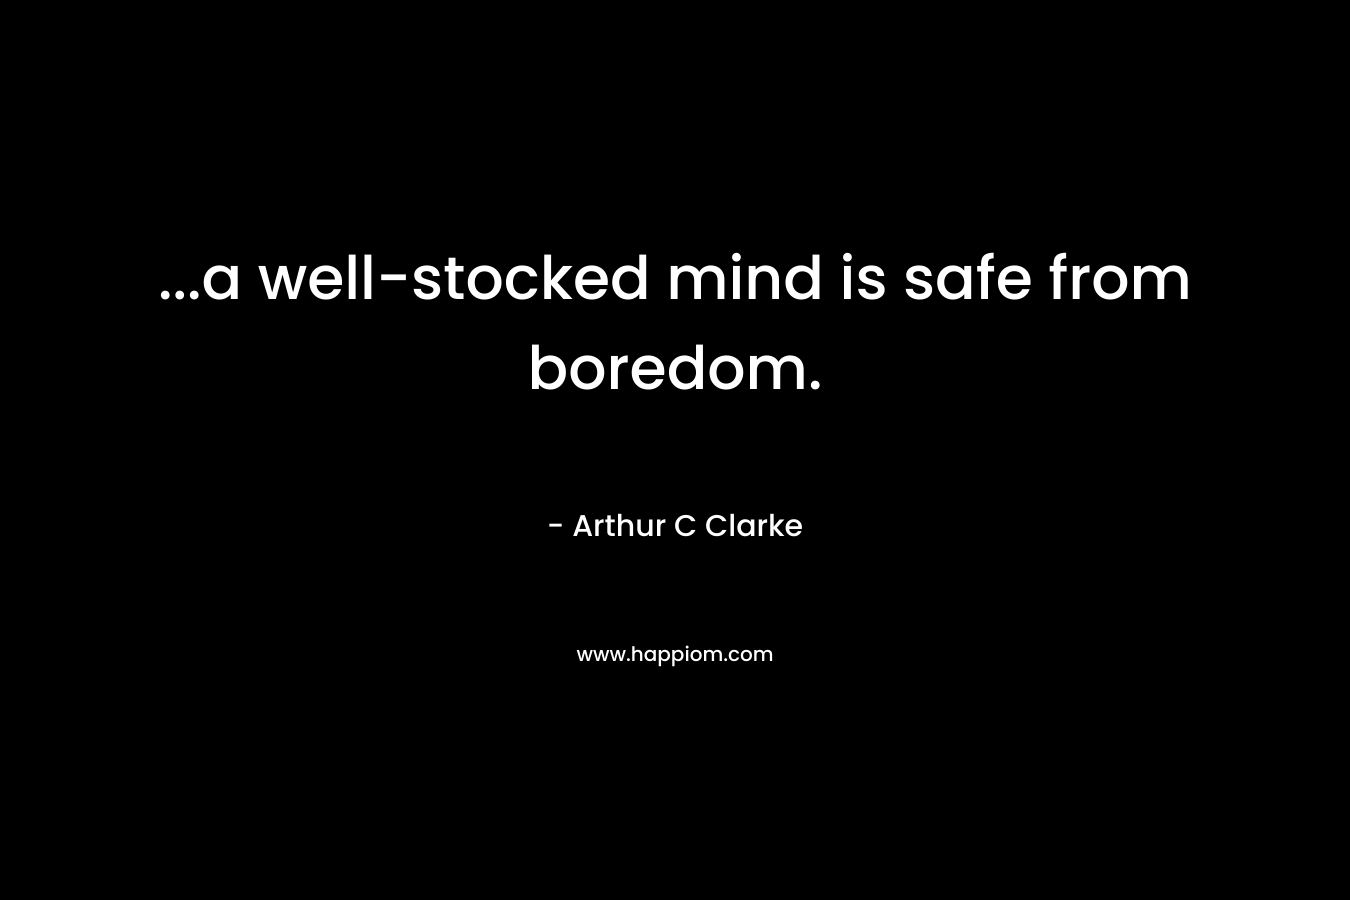 ...a well-stocked mind is safe from boredom.